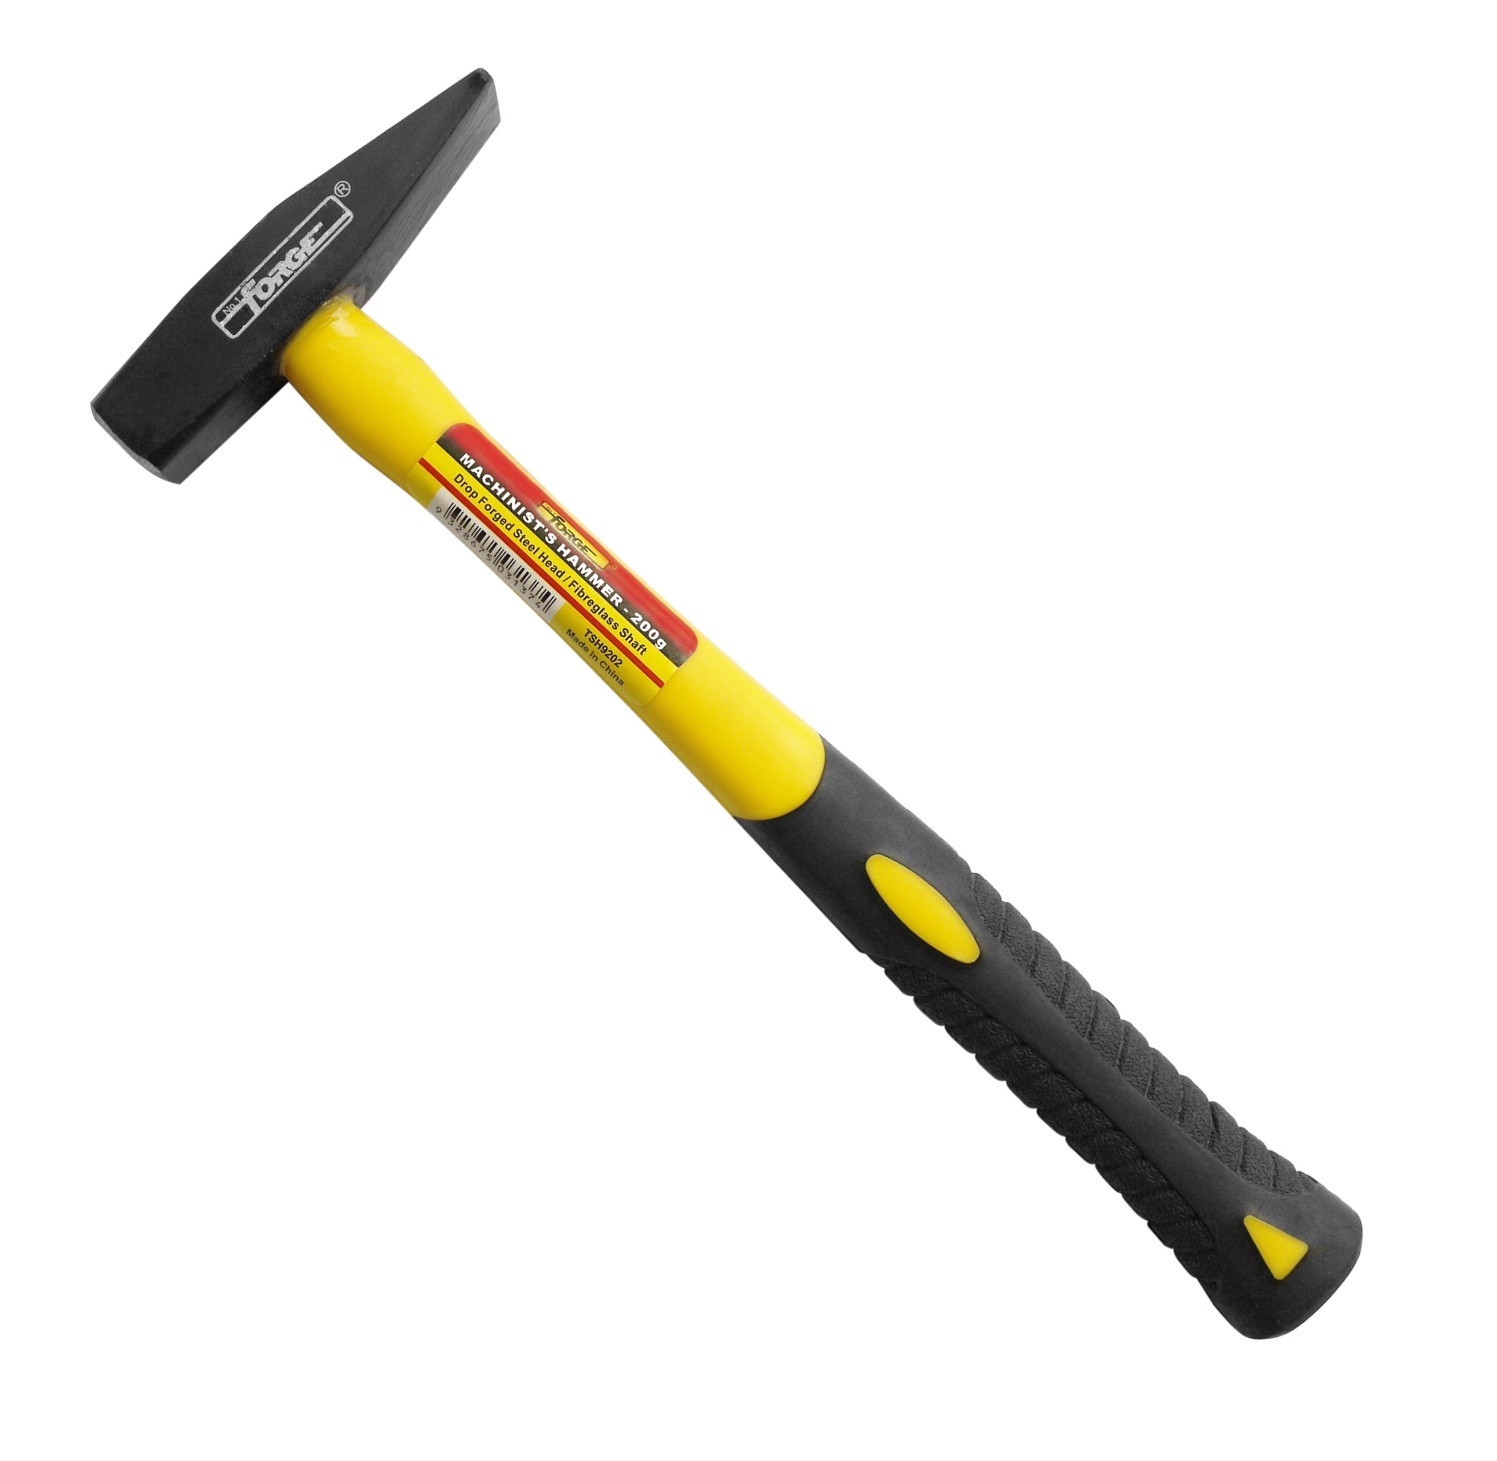 Hand Tools 200g Drop Forged Machinist's Hammer with Fiberglass Shaft